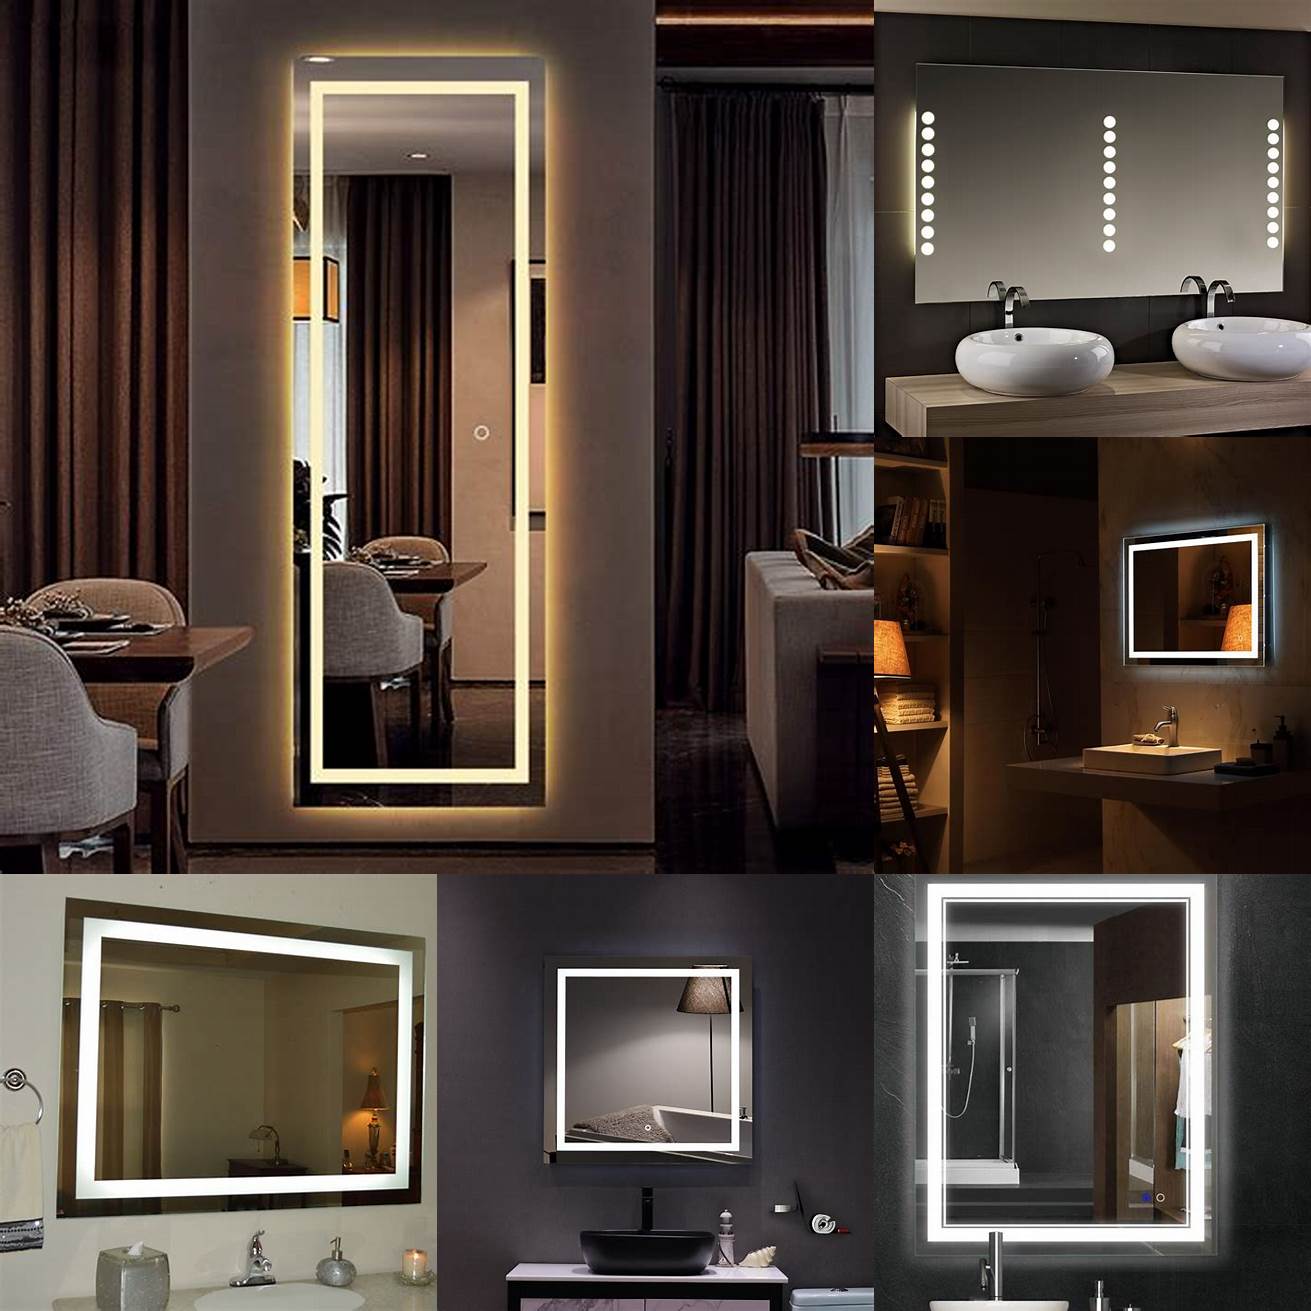 A mirror with built-in lighting can provide functional and stylish lighting